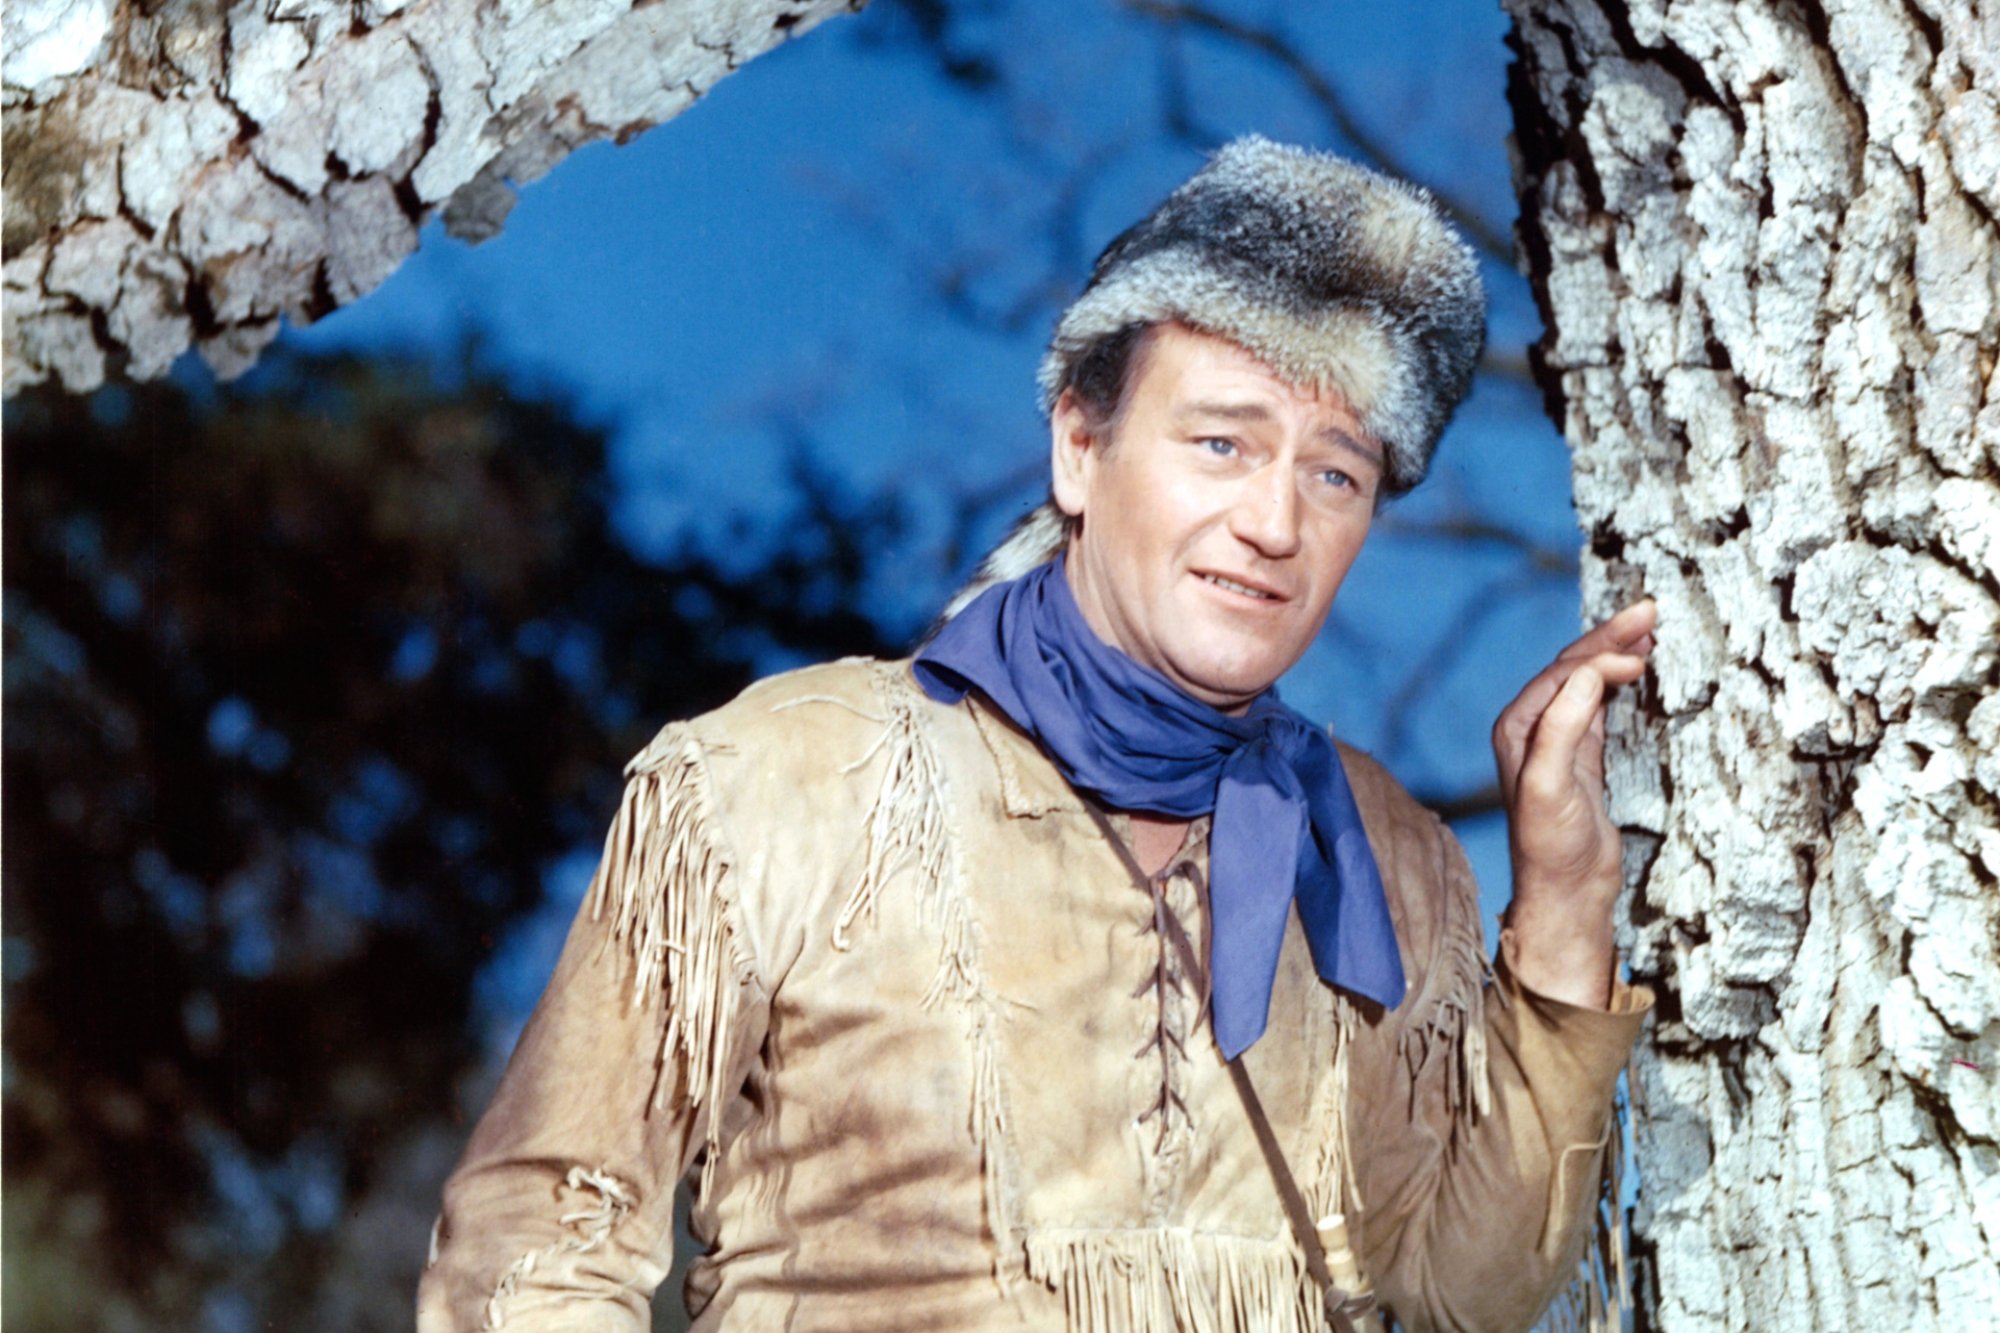 'The Alamo' John Wayne, whose wife was on the set with him. He's wearing an animal pelt hat, fringed Western clothing, while he leans against a tree.